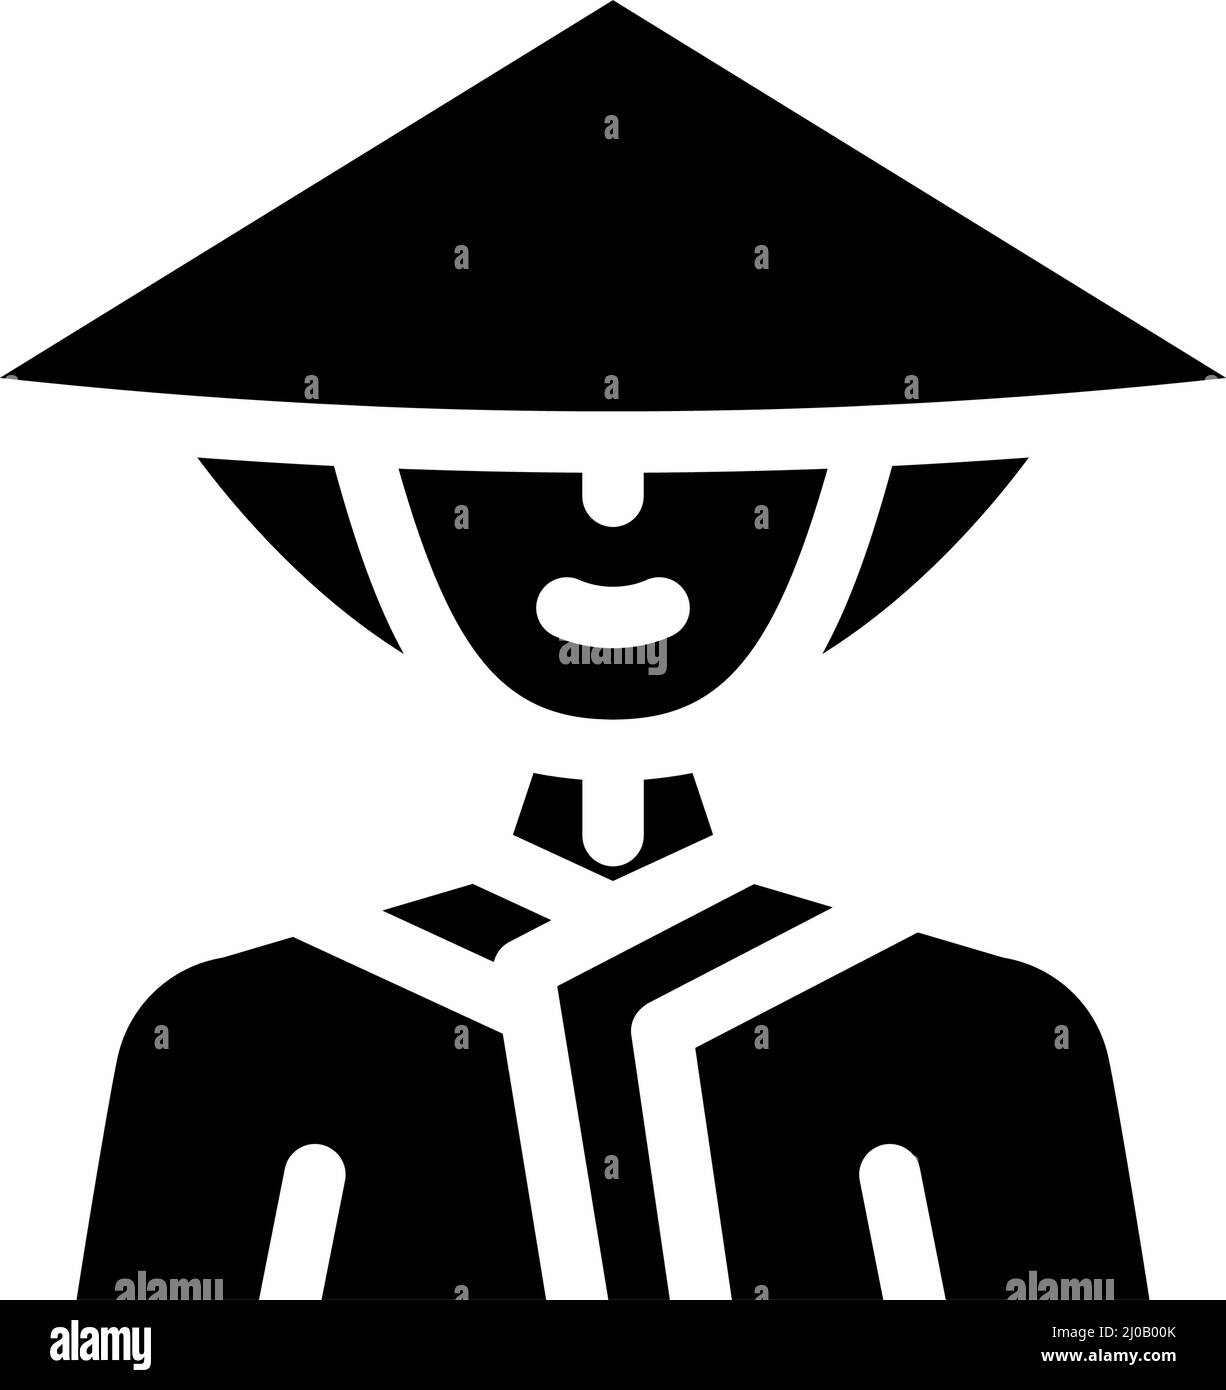 dawley chinese conical hat glyph icon vector illustration Stock Vector